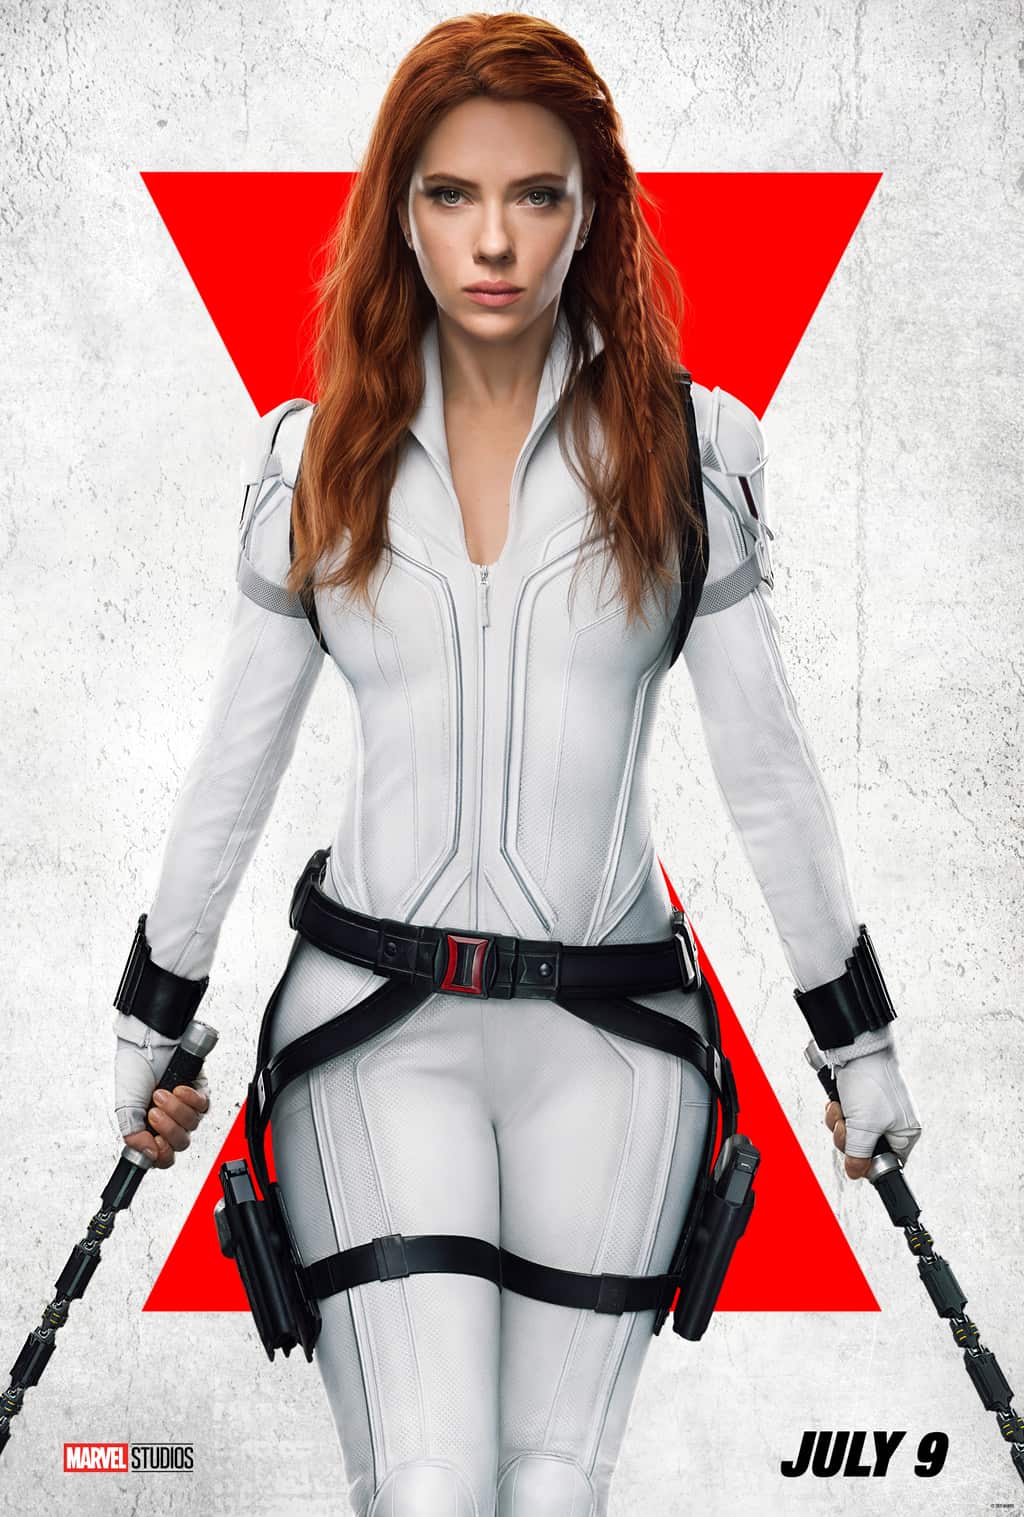 is black widow safe for kids movie poster